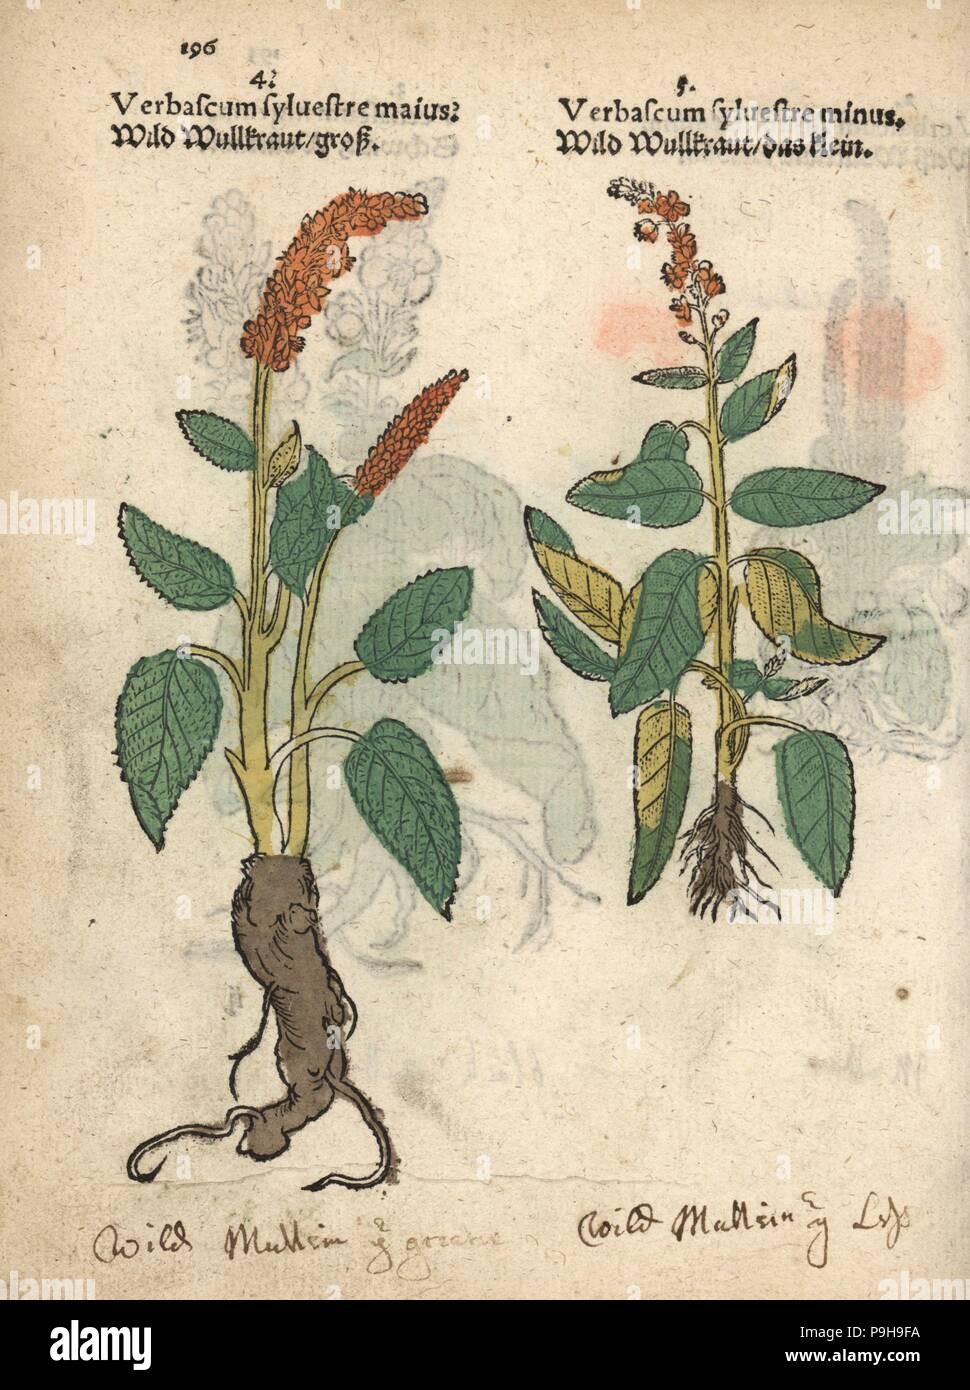 Dark mullein, Verbascum nigrum, varieties. Handcoloured woodblock engraving of a botanical illustration from Adam Lonicer's Krauterbuch, or Herbal, Frankfurt, 1557. This from a 17th century pirate edition or atlas of illustrations only, with captions in Latin, Greek, French, Italian, German, and in English manuscript. Stock Photo